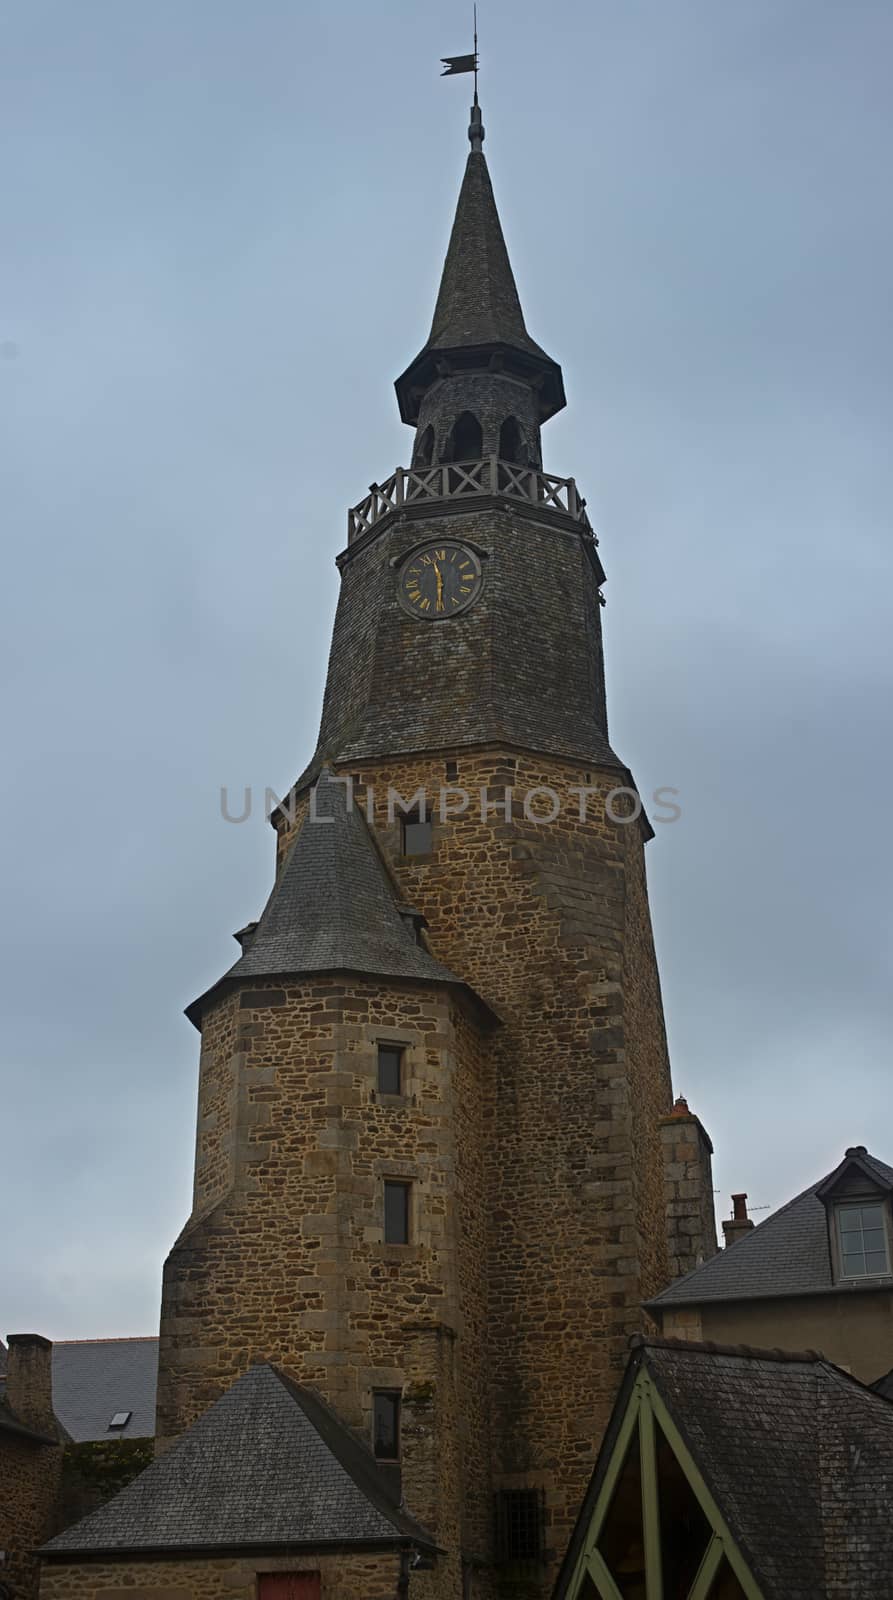 Old medieval stone clock tower in Dinan, France by sheriffkule